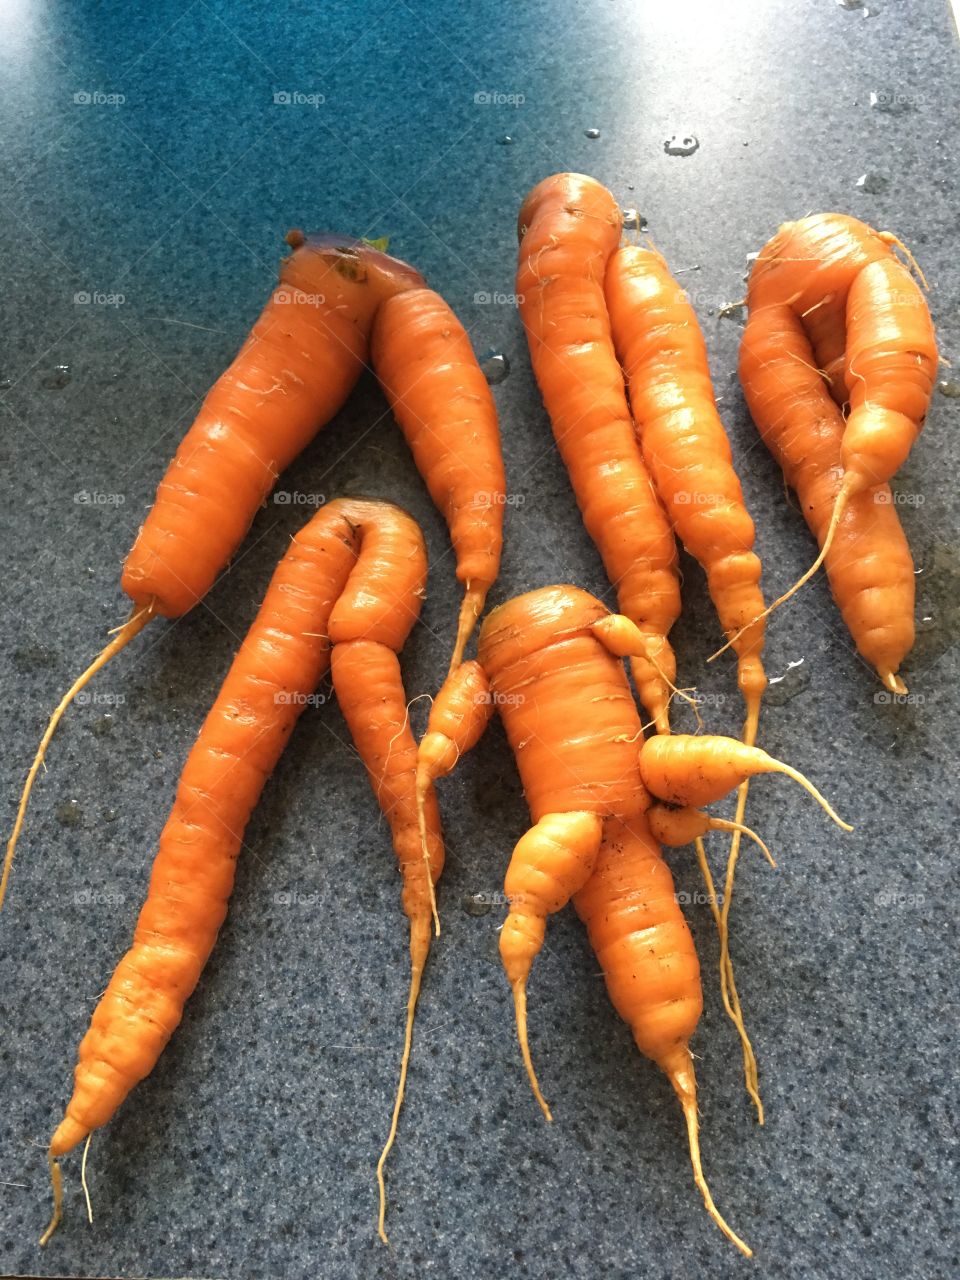 Perfect imperfect carrots 